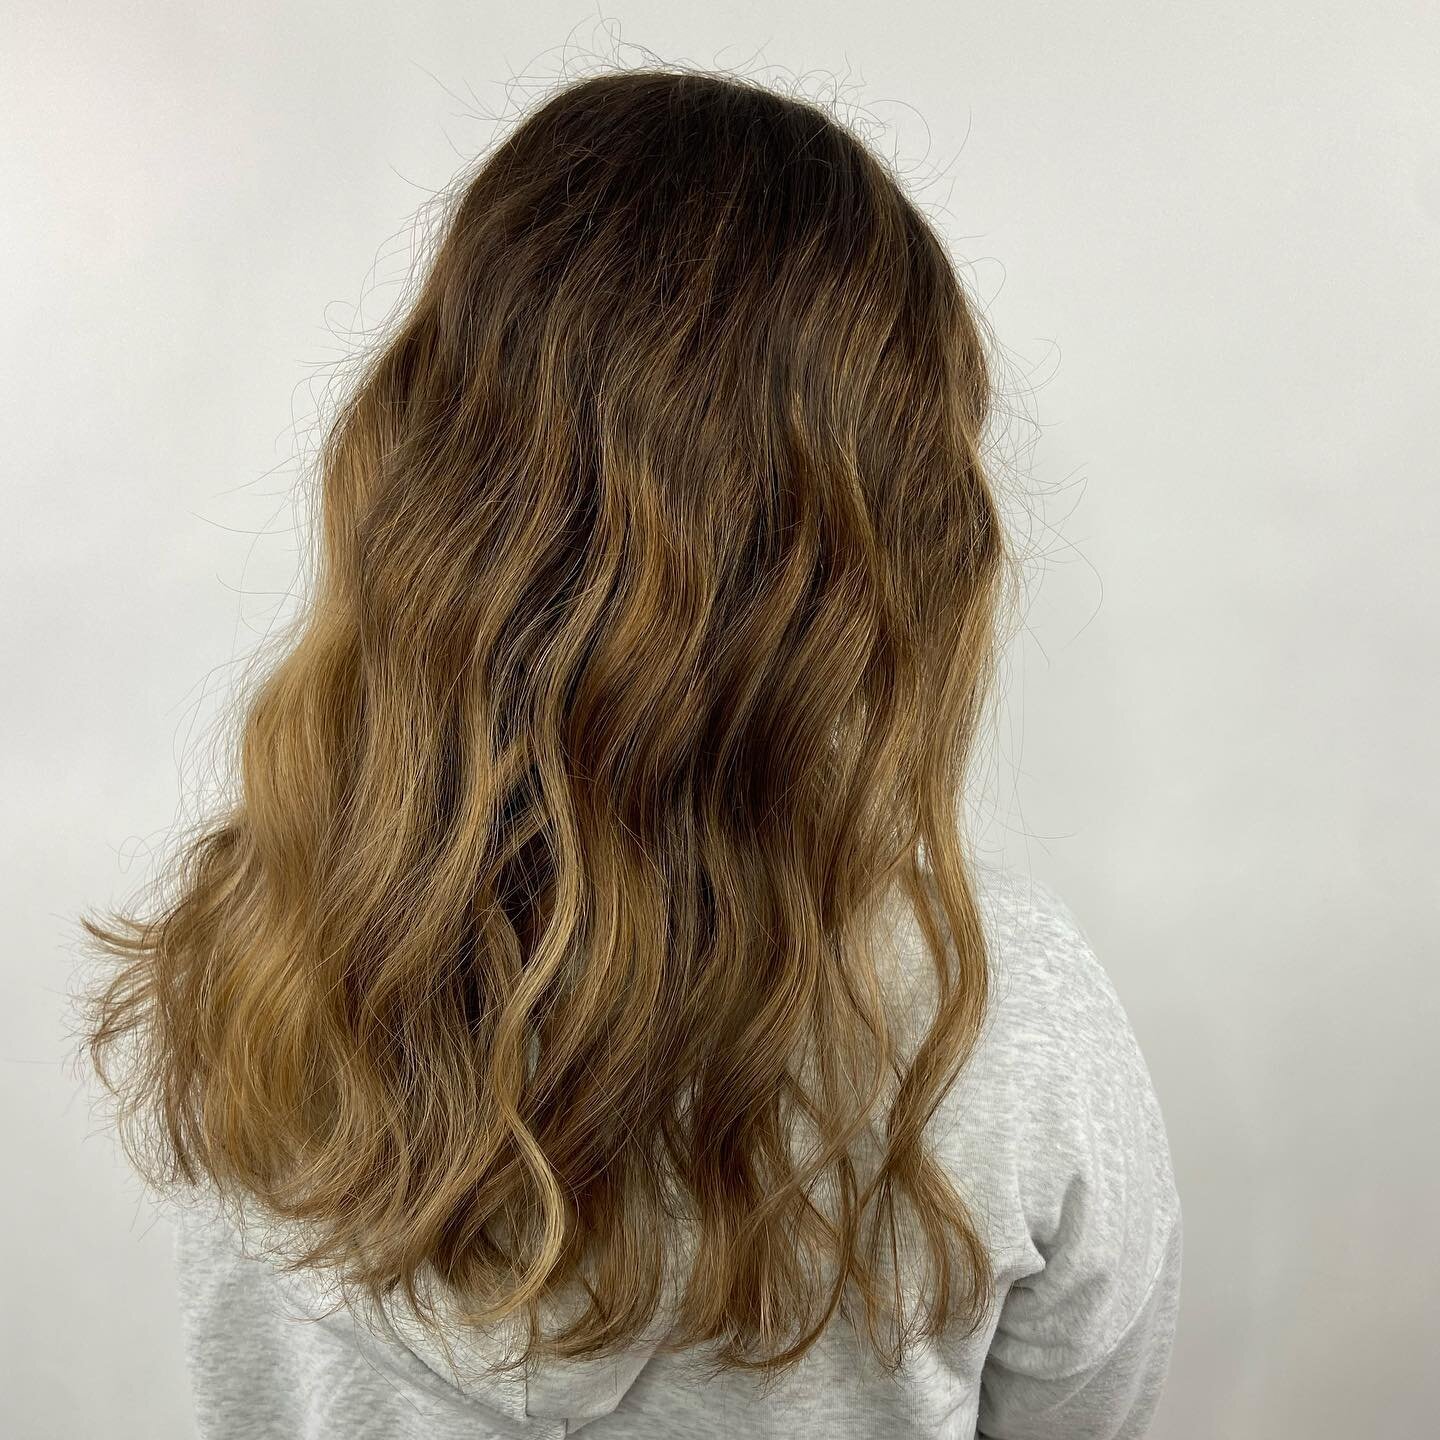 I think I&rsquo;m most excited to see this beautiful balayage on her natural curls 😍